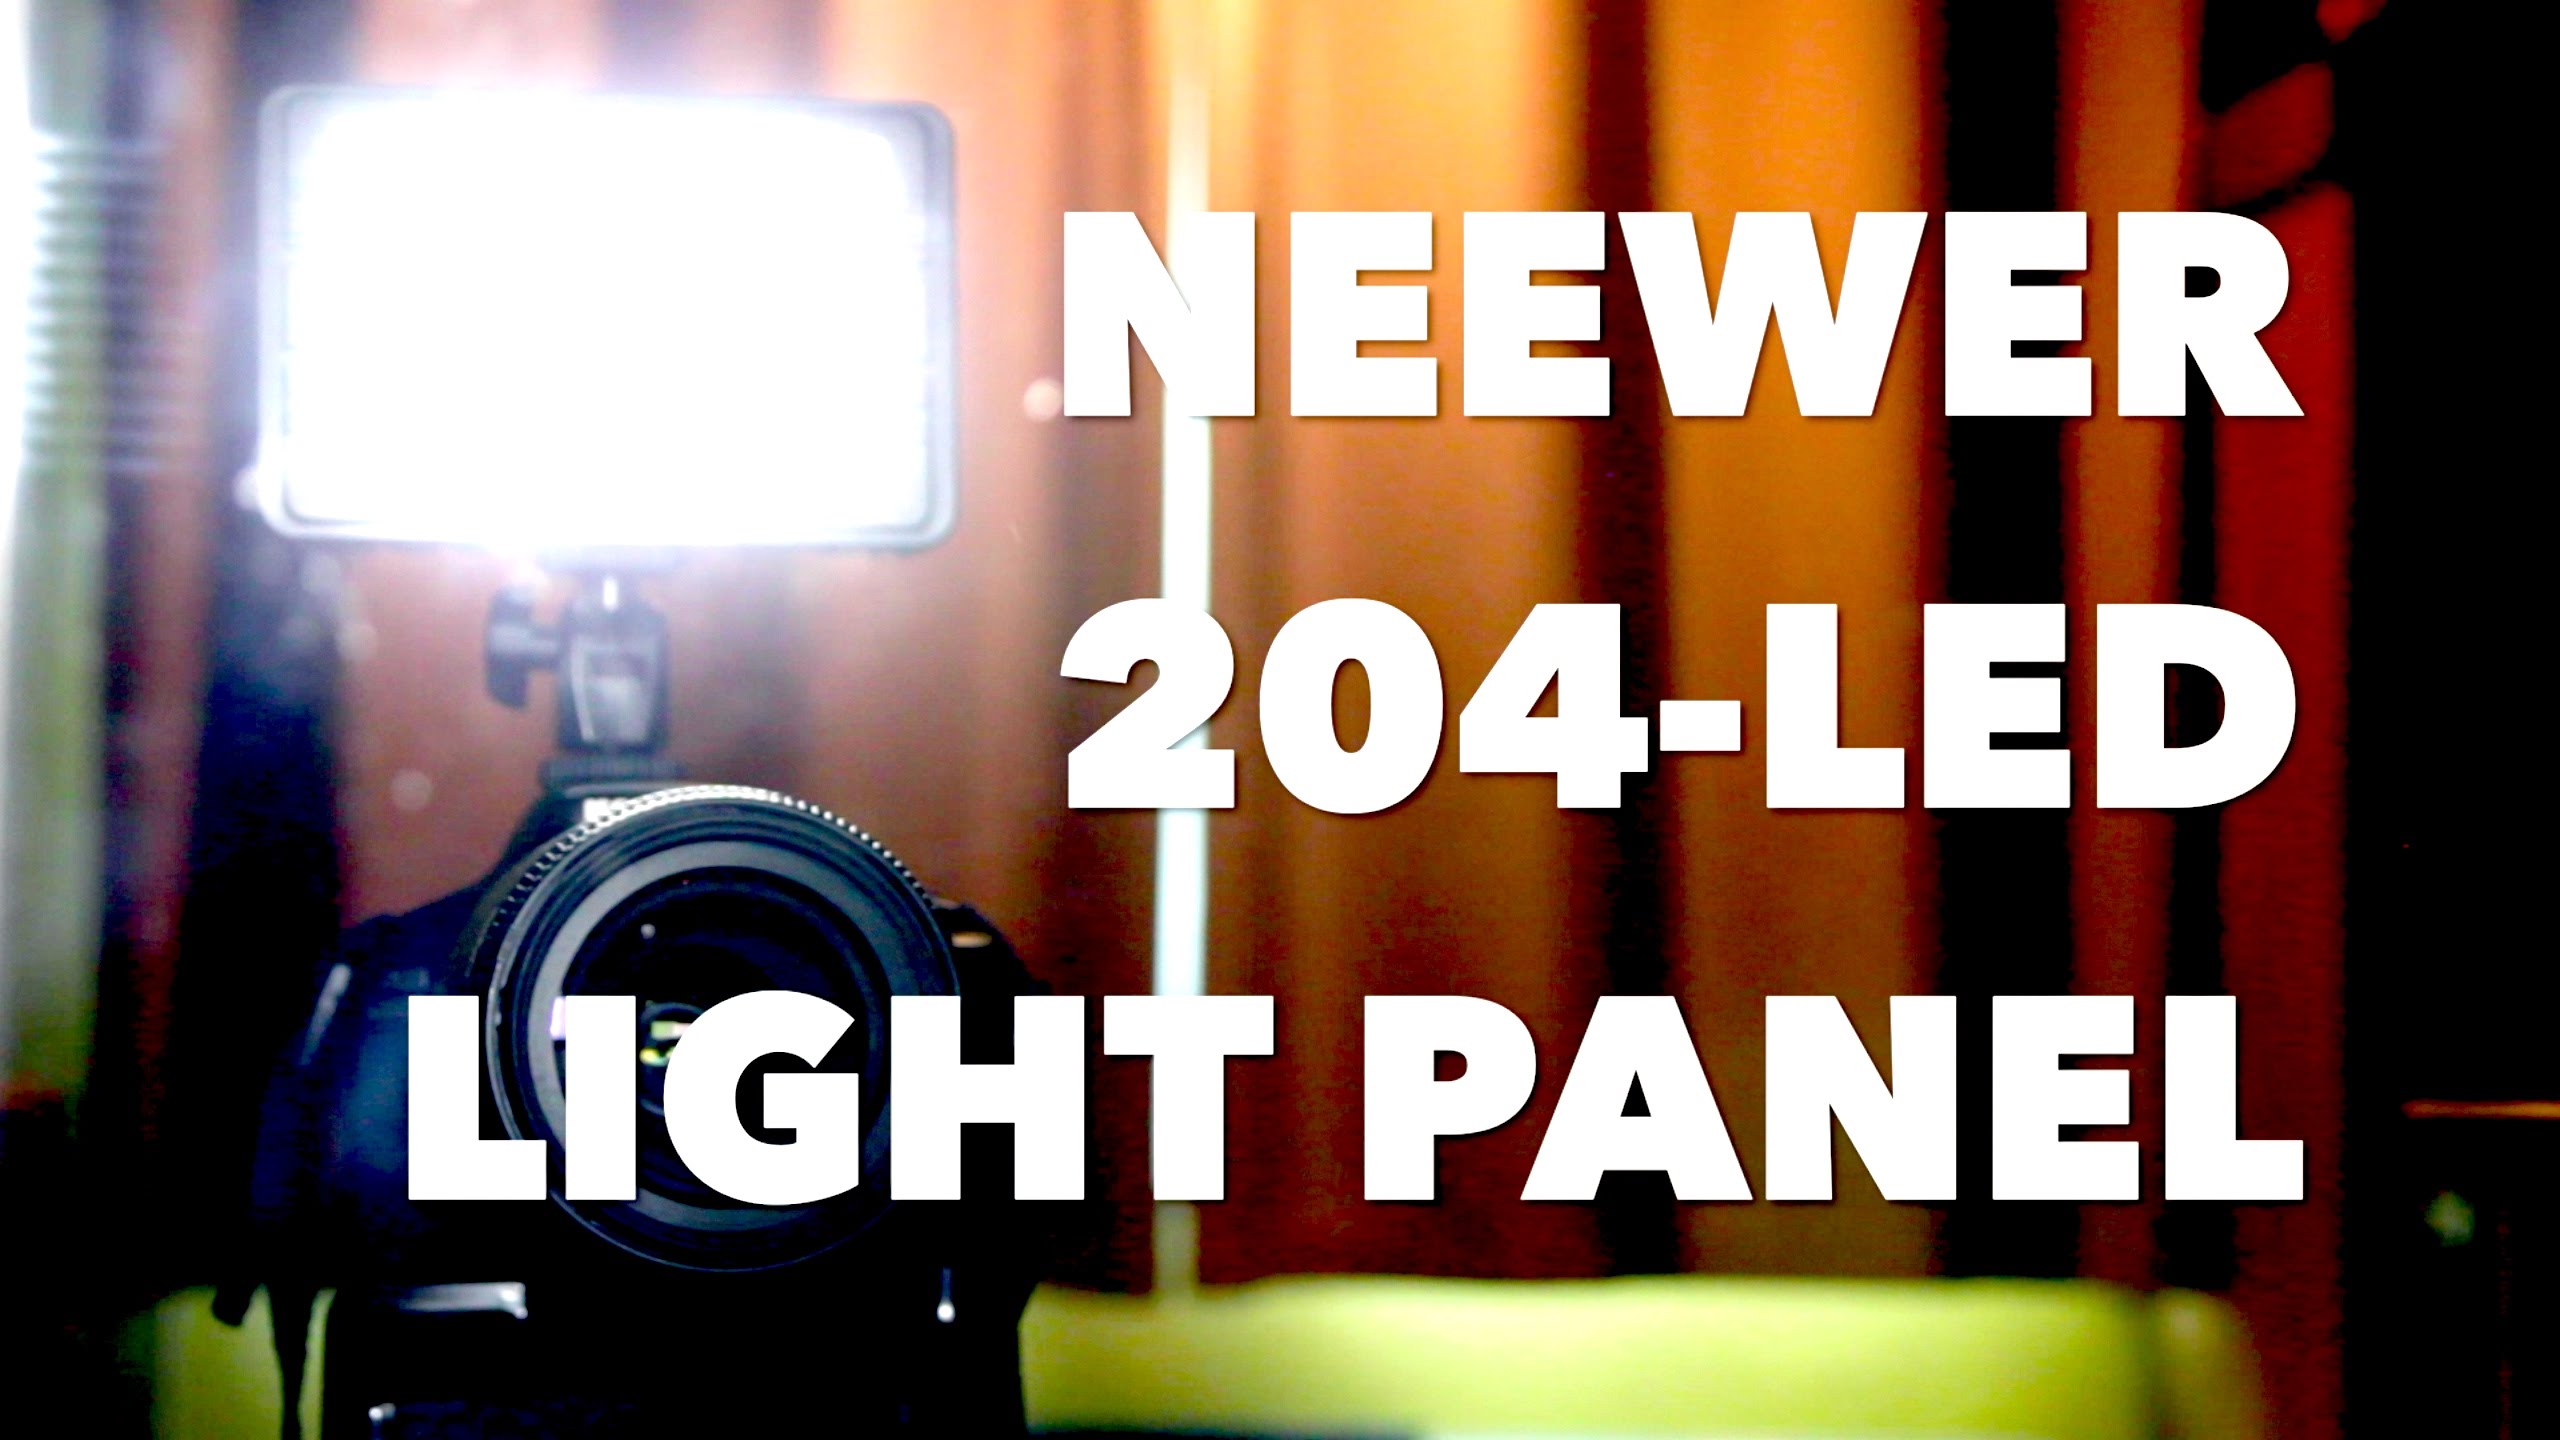 NEEWER 204-LED Light Panel Review